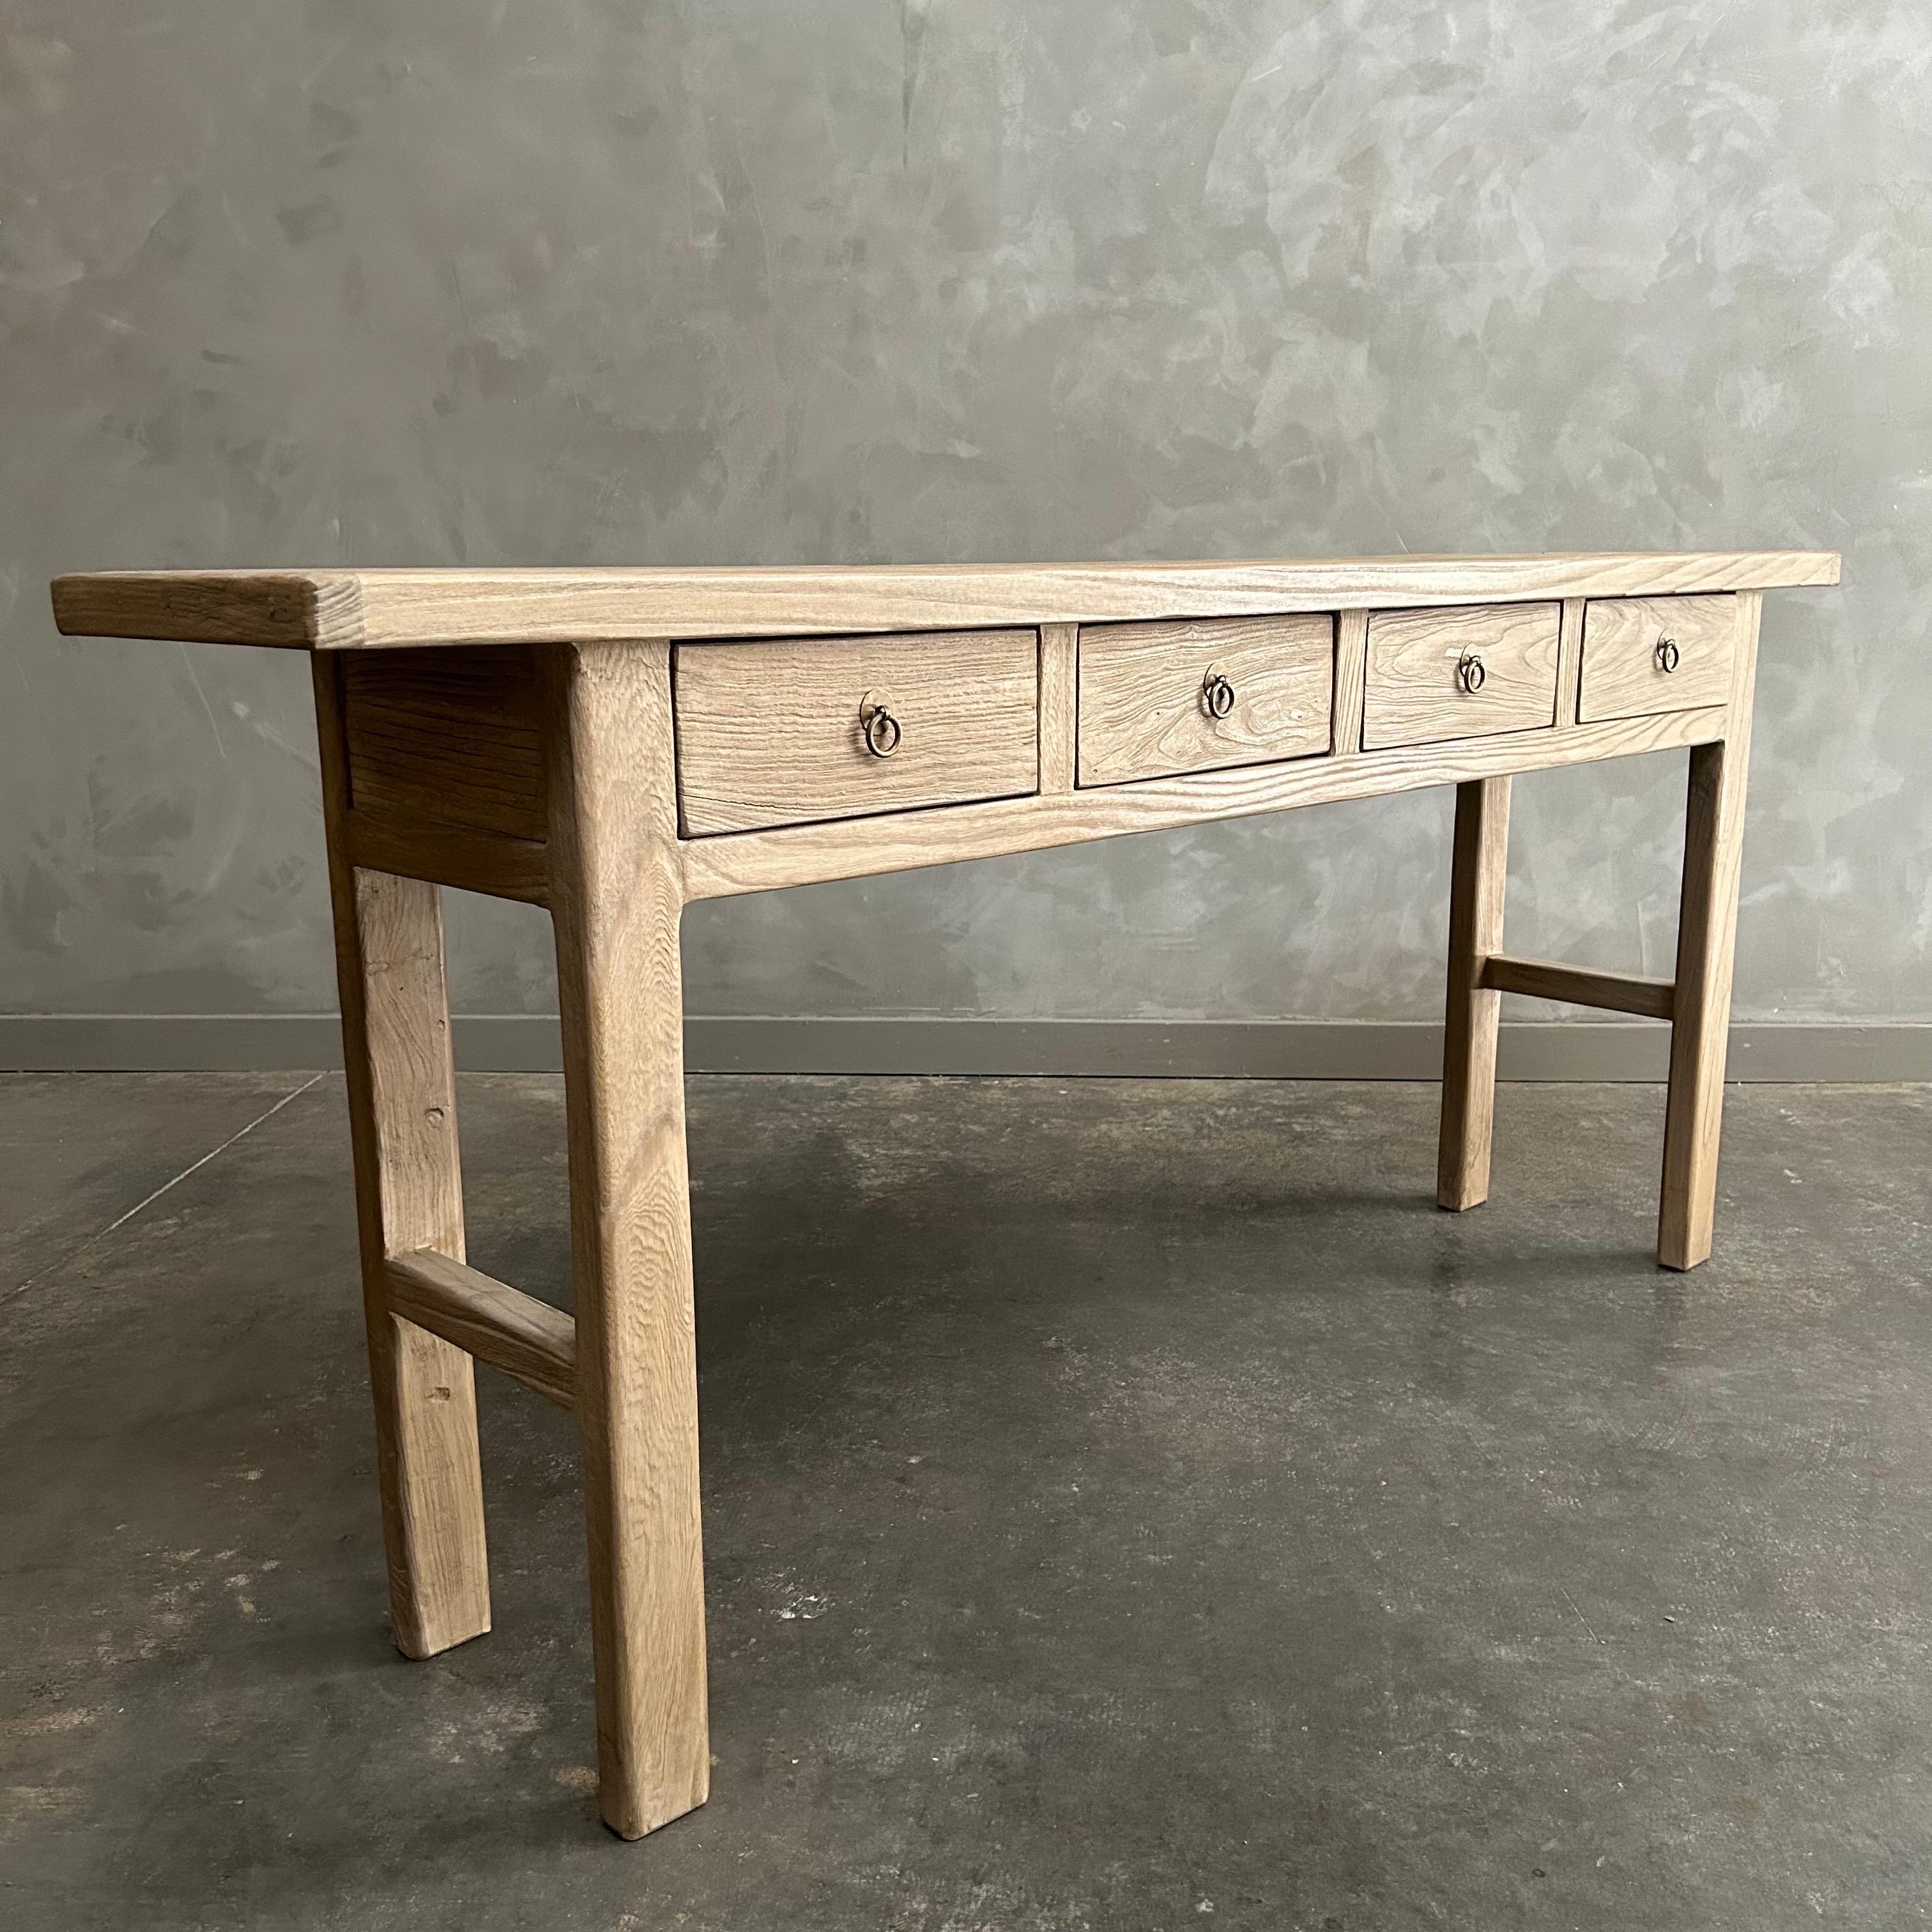 Rudi Drawer Console
reclaimed elm wood console that is beautifully crafted and serves as the perfect storage solution for any space. Since this is made from vintage reclaimed materials, there may be some imperfections in the piece or grain of the